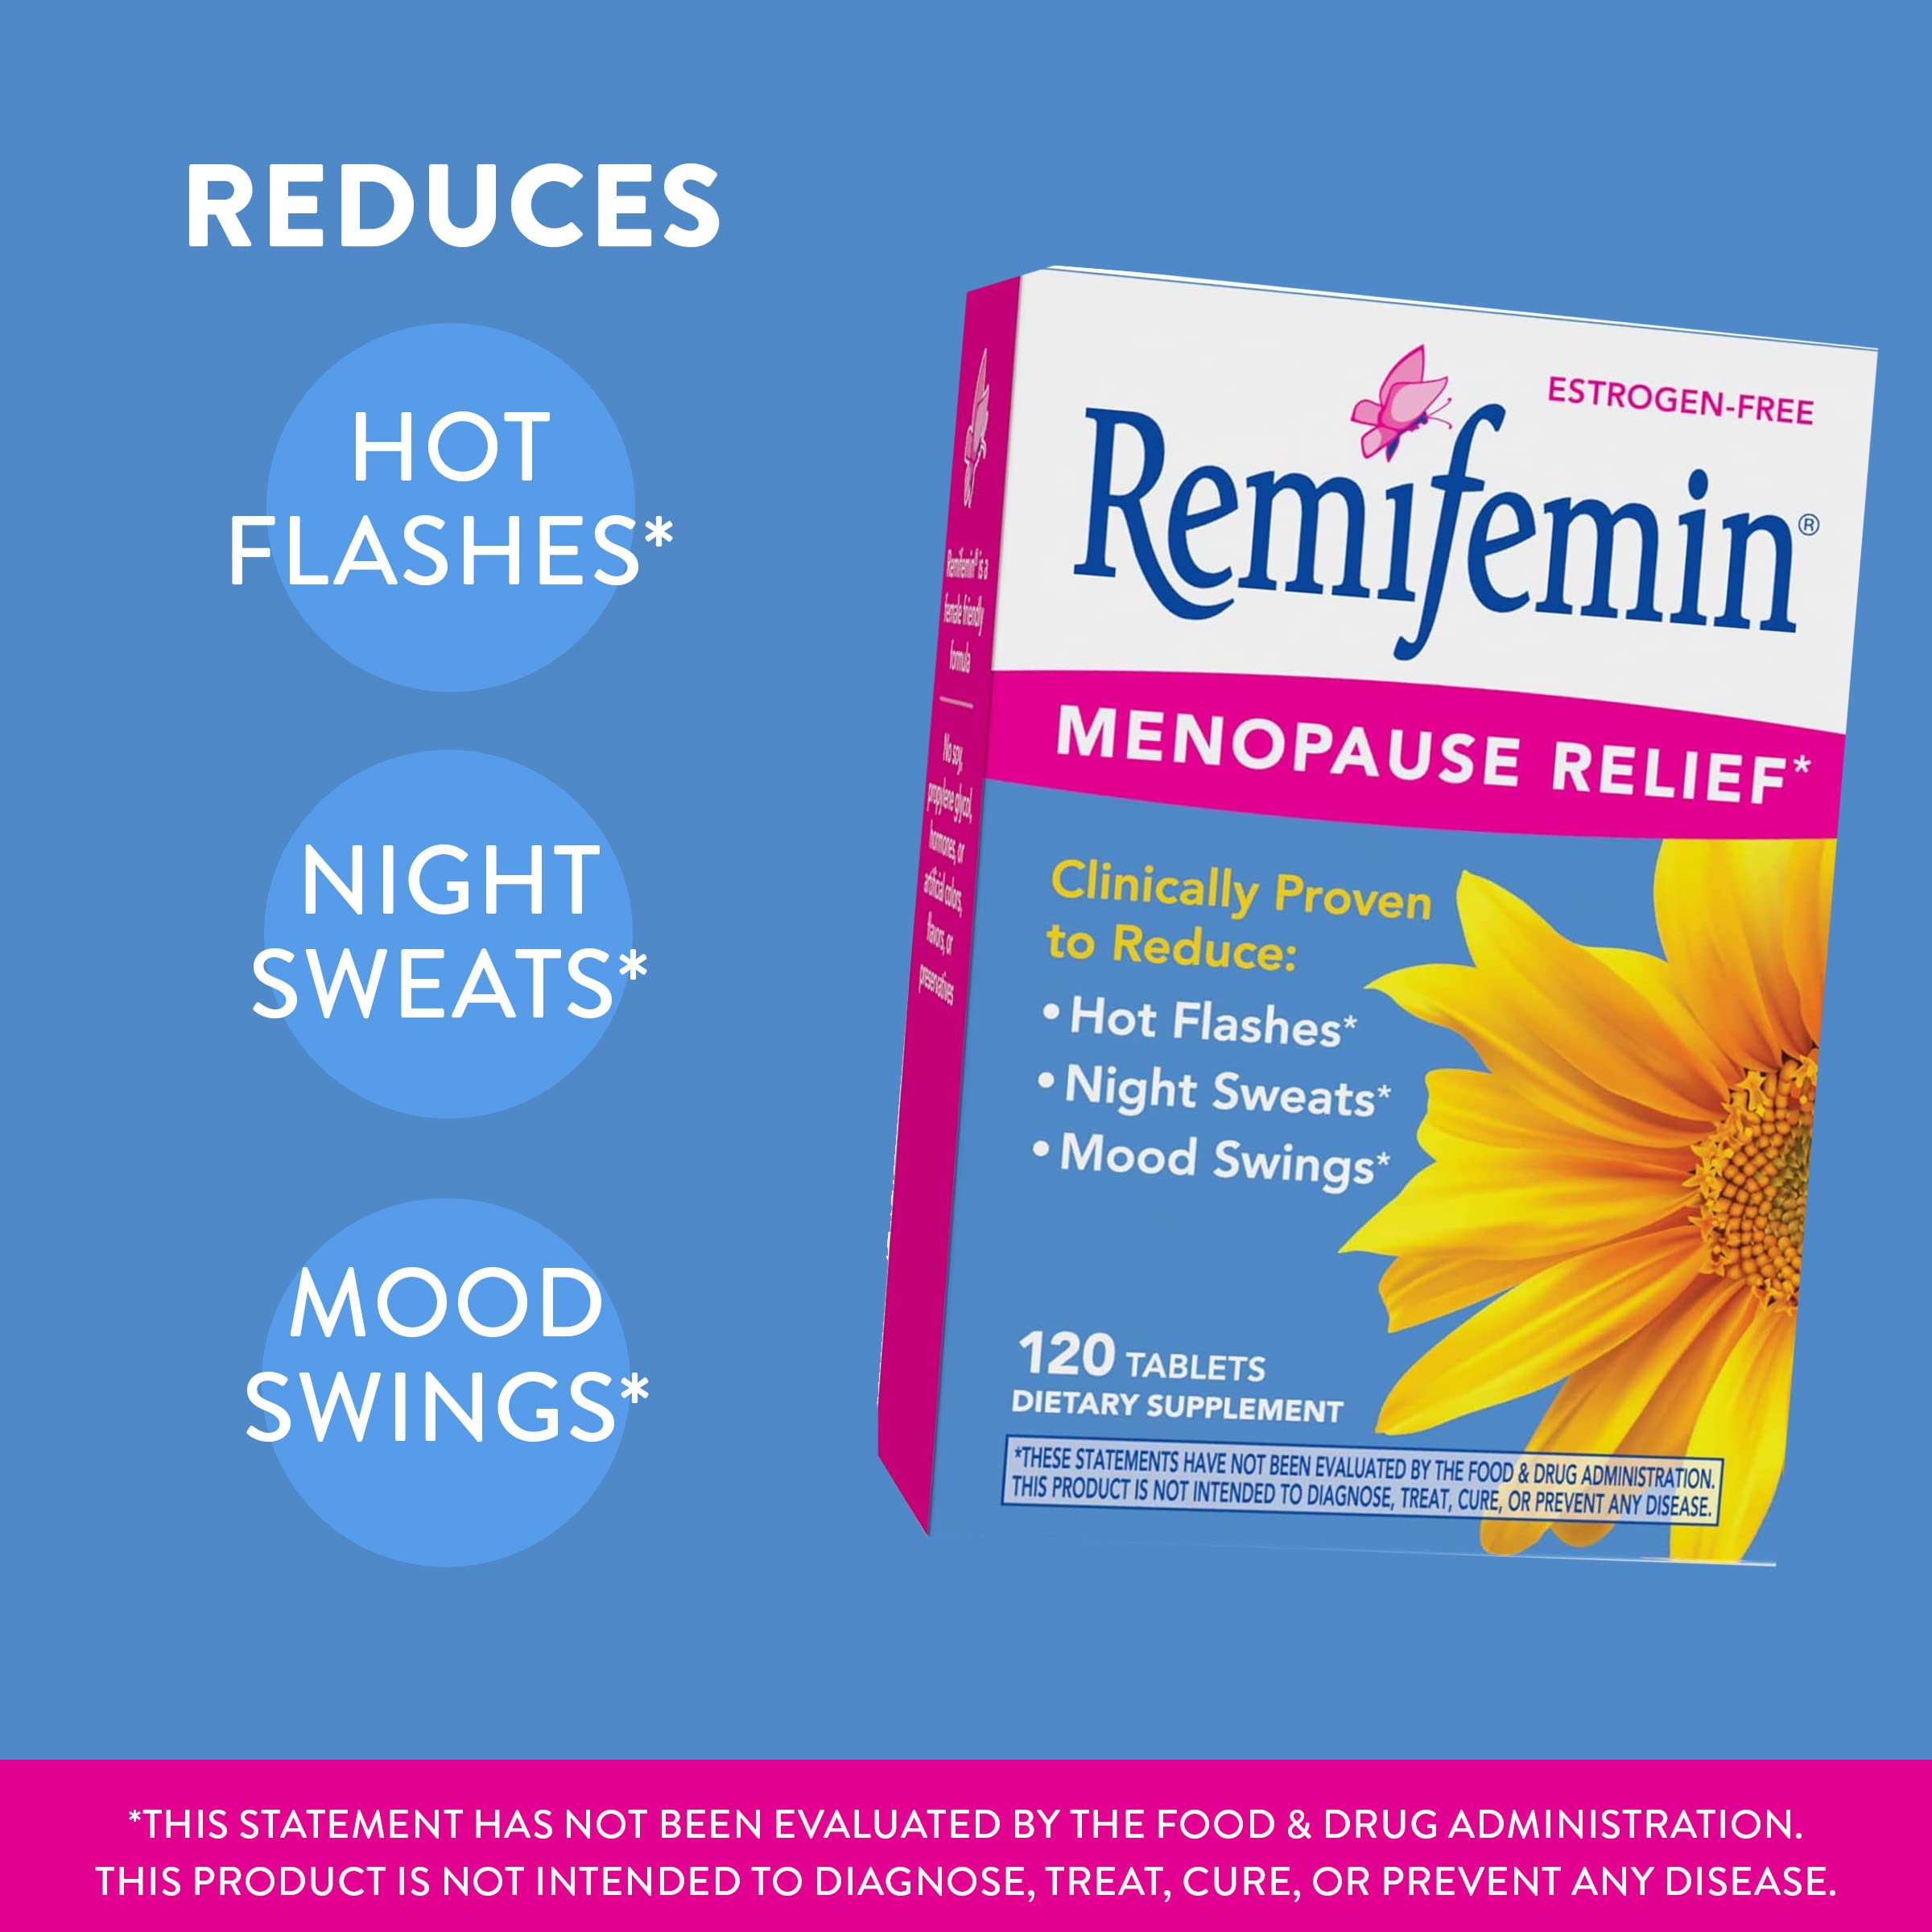 Nature's Way Remifemin, Menopause Relief*, Reduces Hot Flashes and Menopause Symptoms*, Estrogen-Free, 120 Tablets